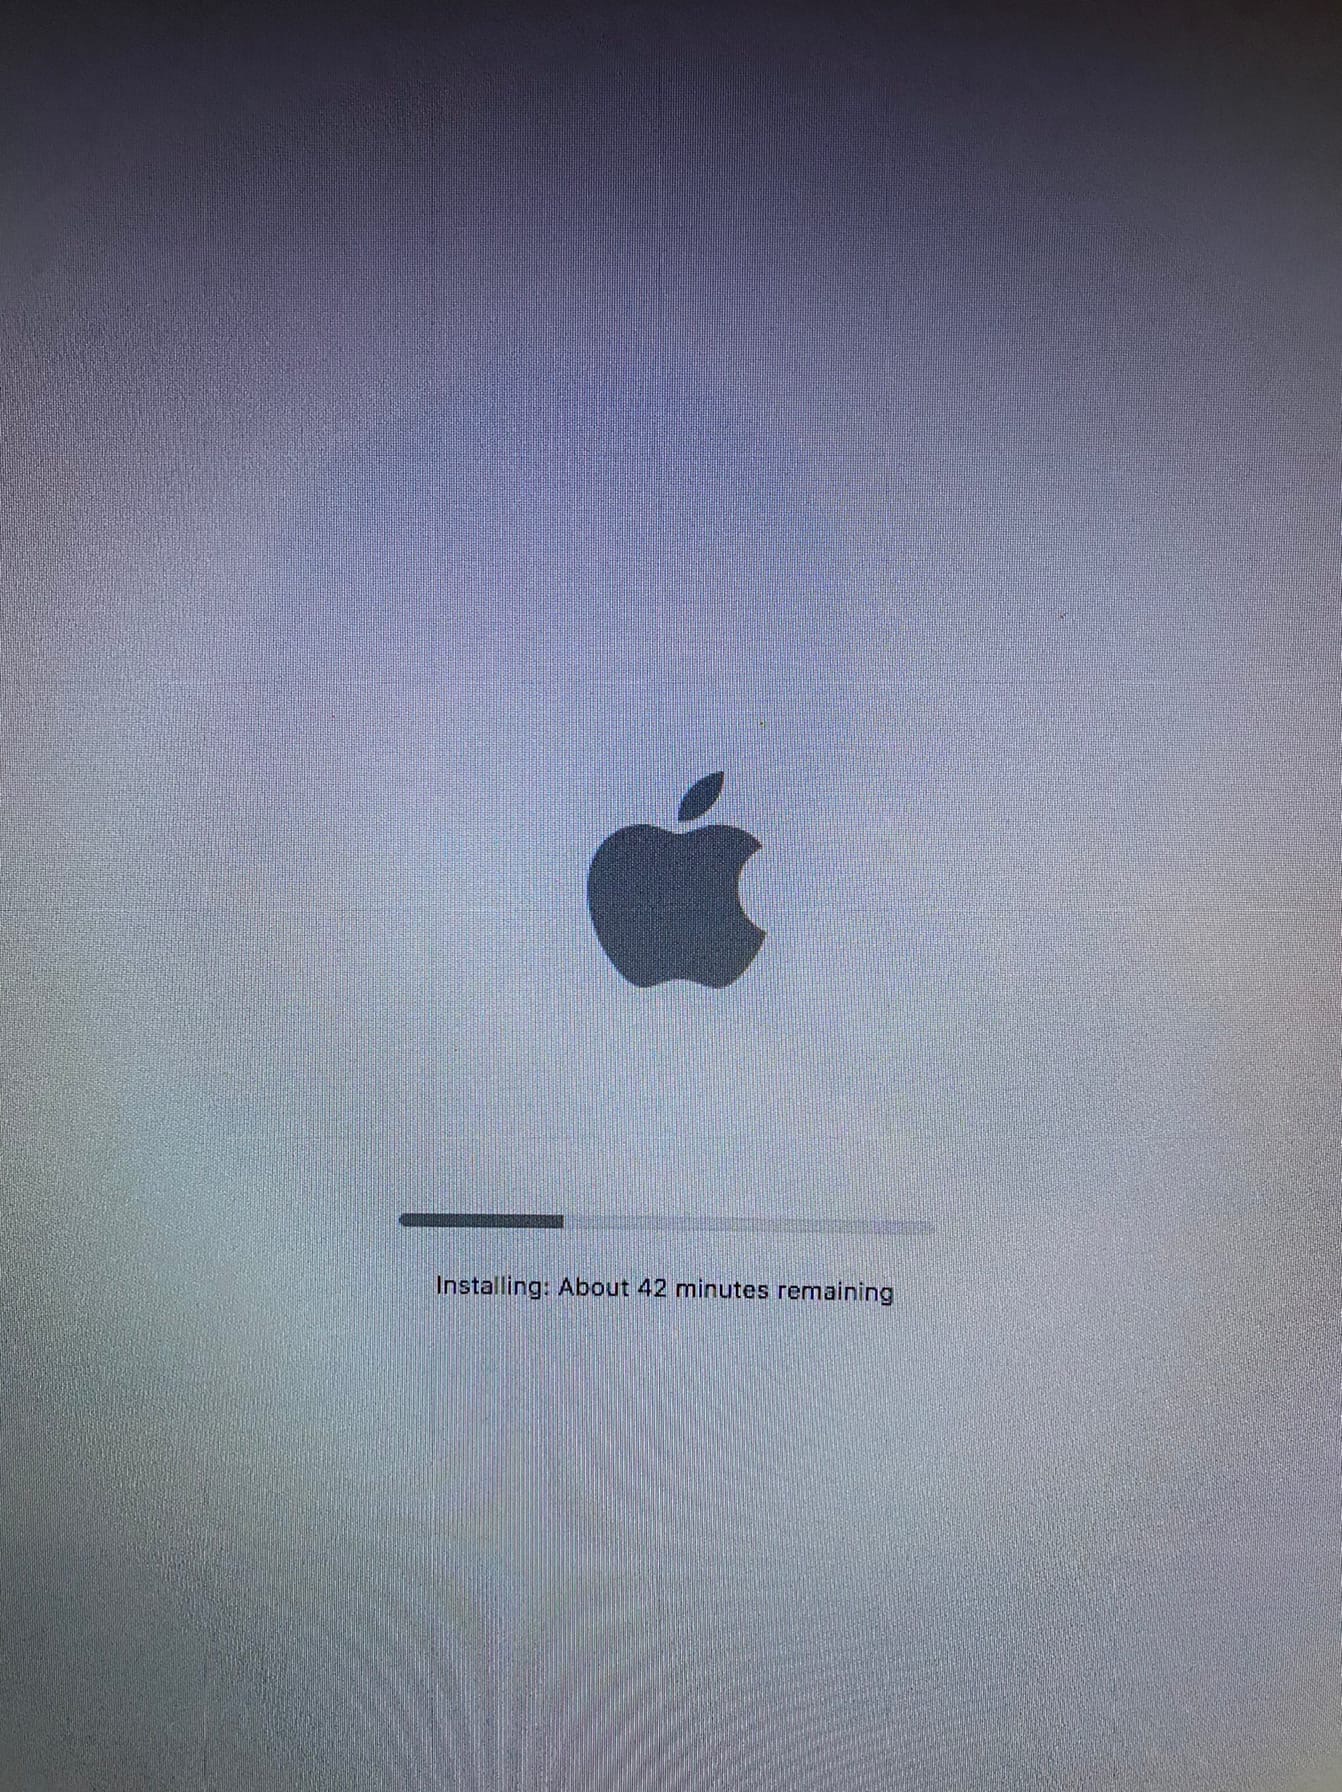 Os x still waiting for root device